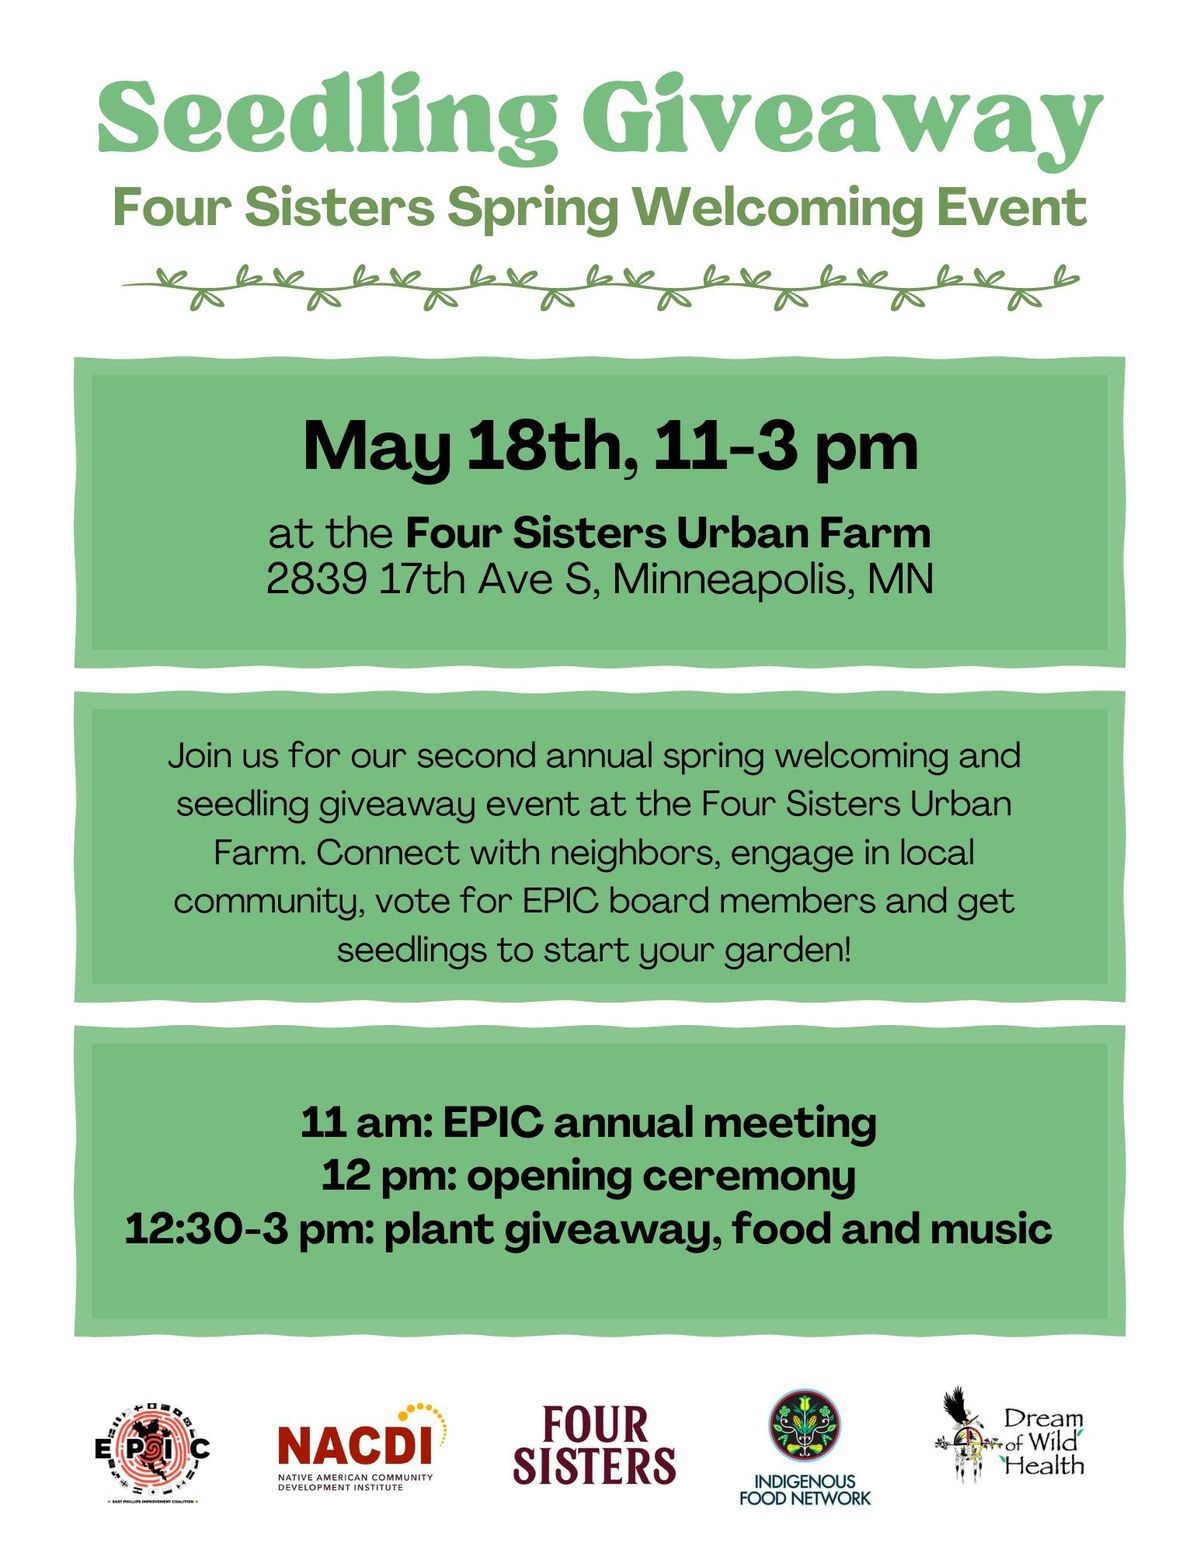 Seeding Giveaway: Four Sisters and EPIC Spring Welcoming Event